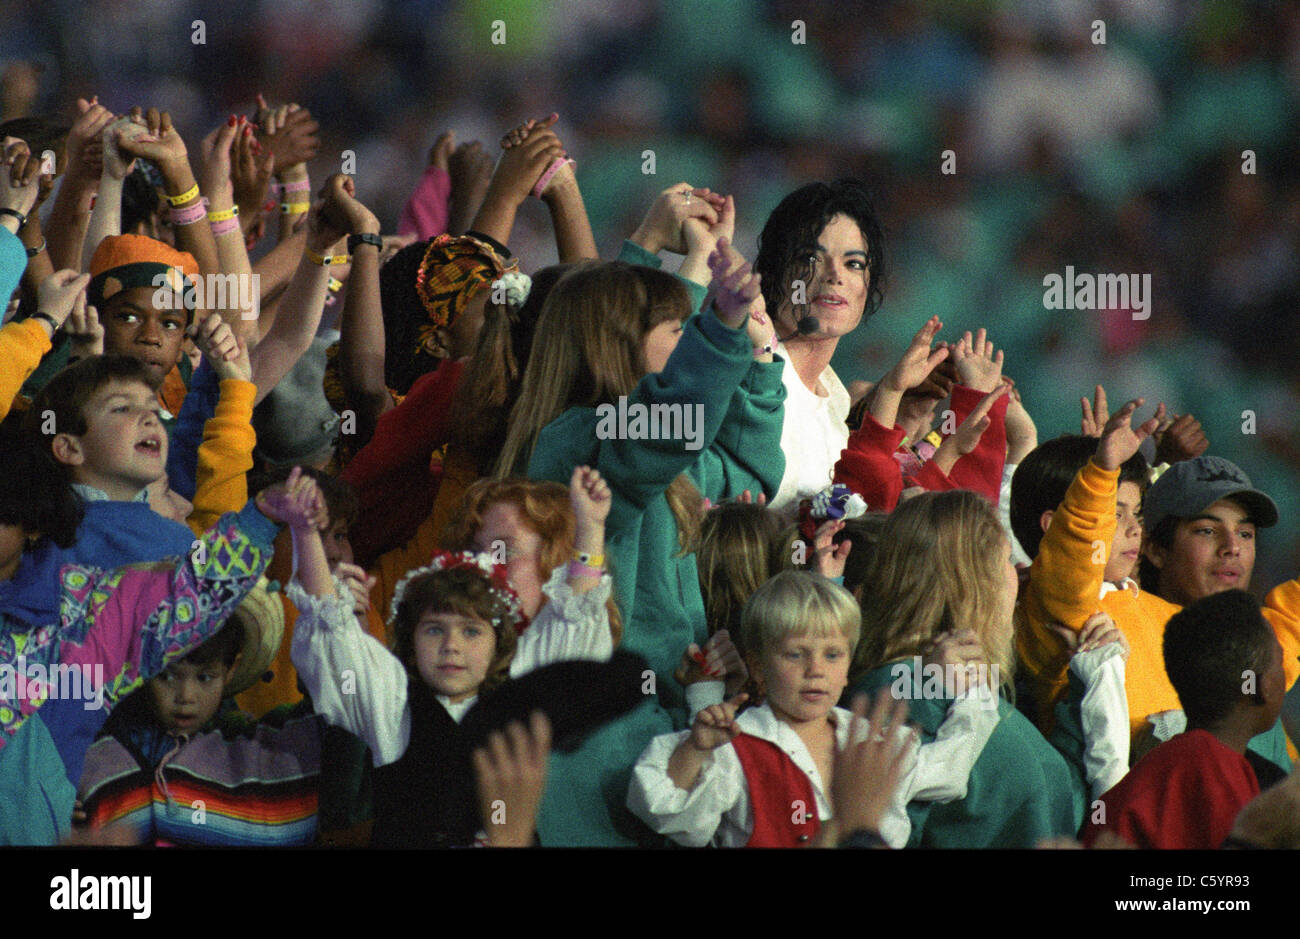 Michael Jackson performs with children from around the world during the 1993 Superbowl halftime show in Pasadena, California. Stock Photo